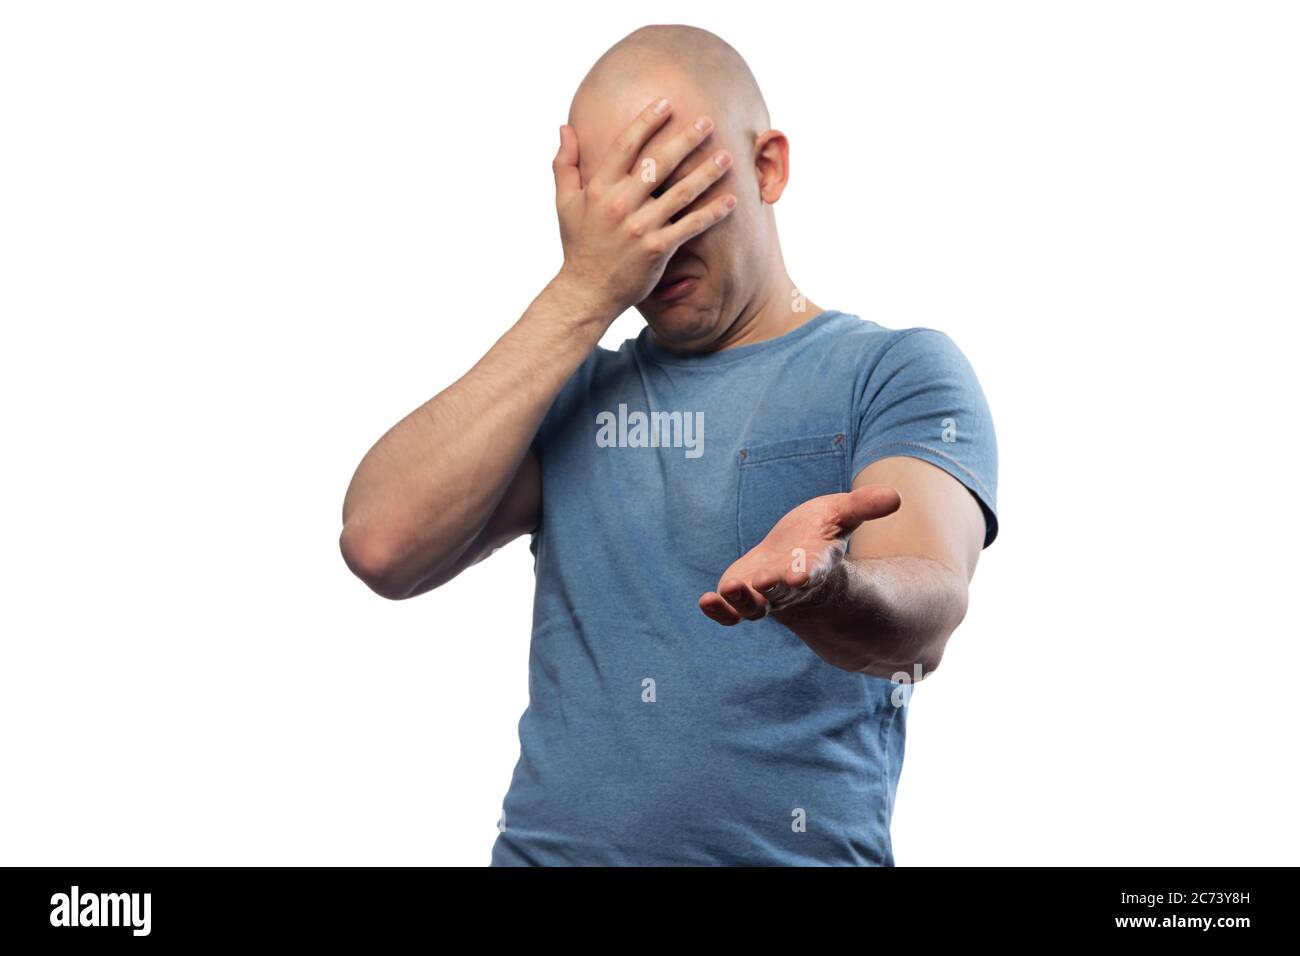 Photo of bald puzzled man in tee shirt showing facepalm gesture Stock Photo